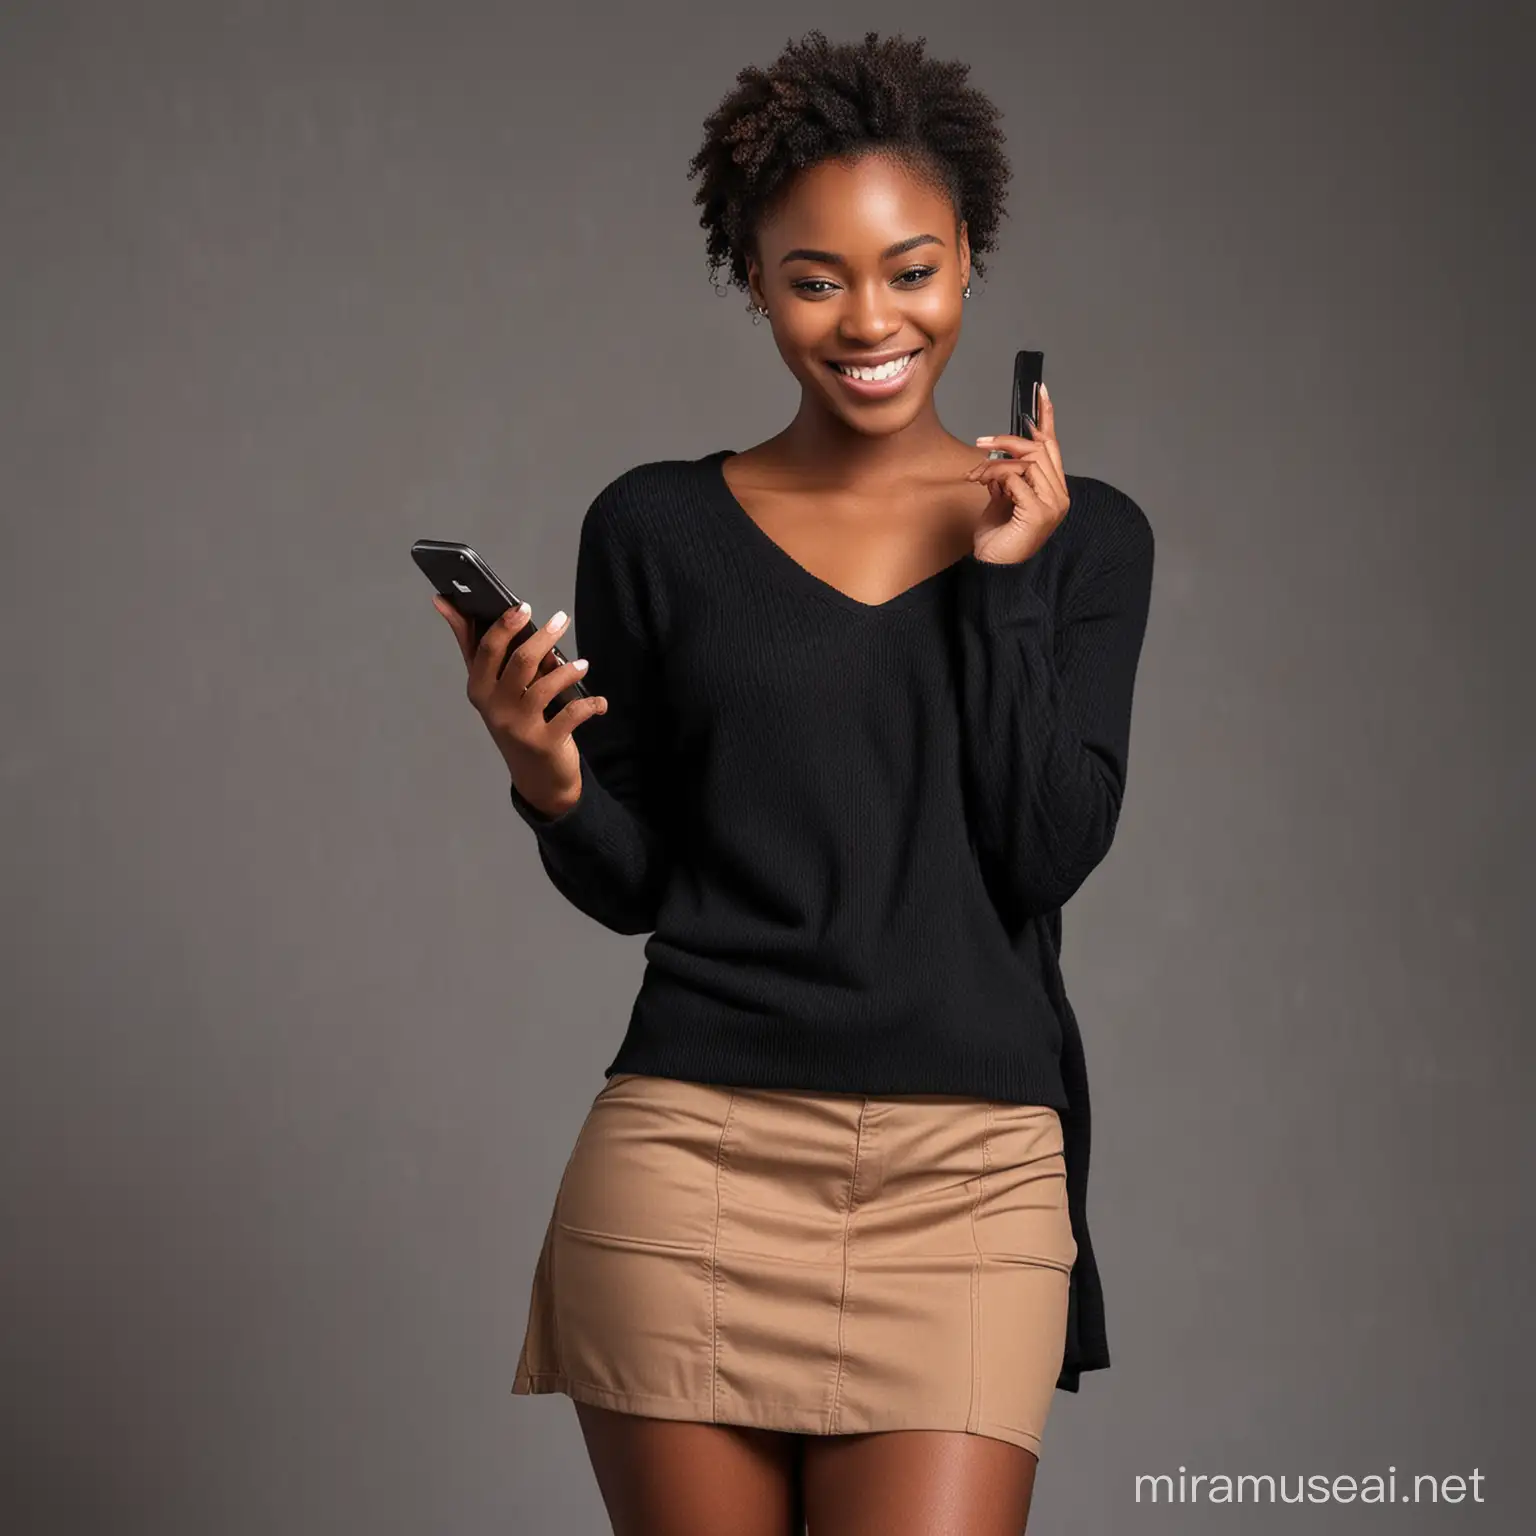 Confident African Female Student in Stylish Attire Texting on Mobile Phone